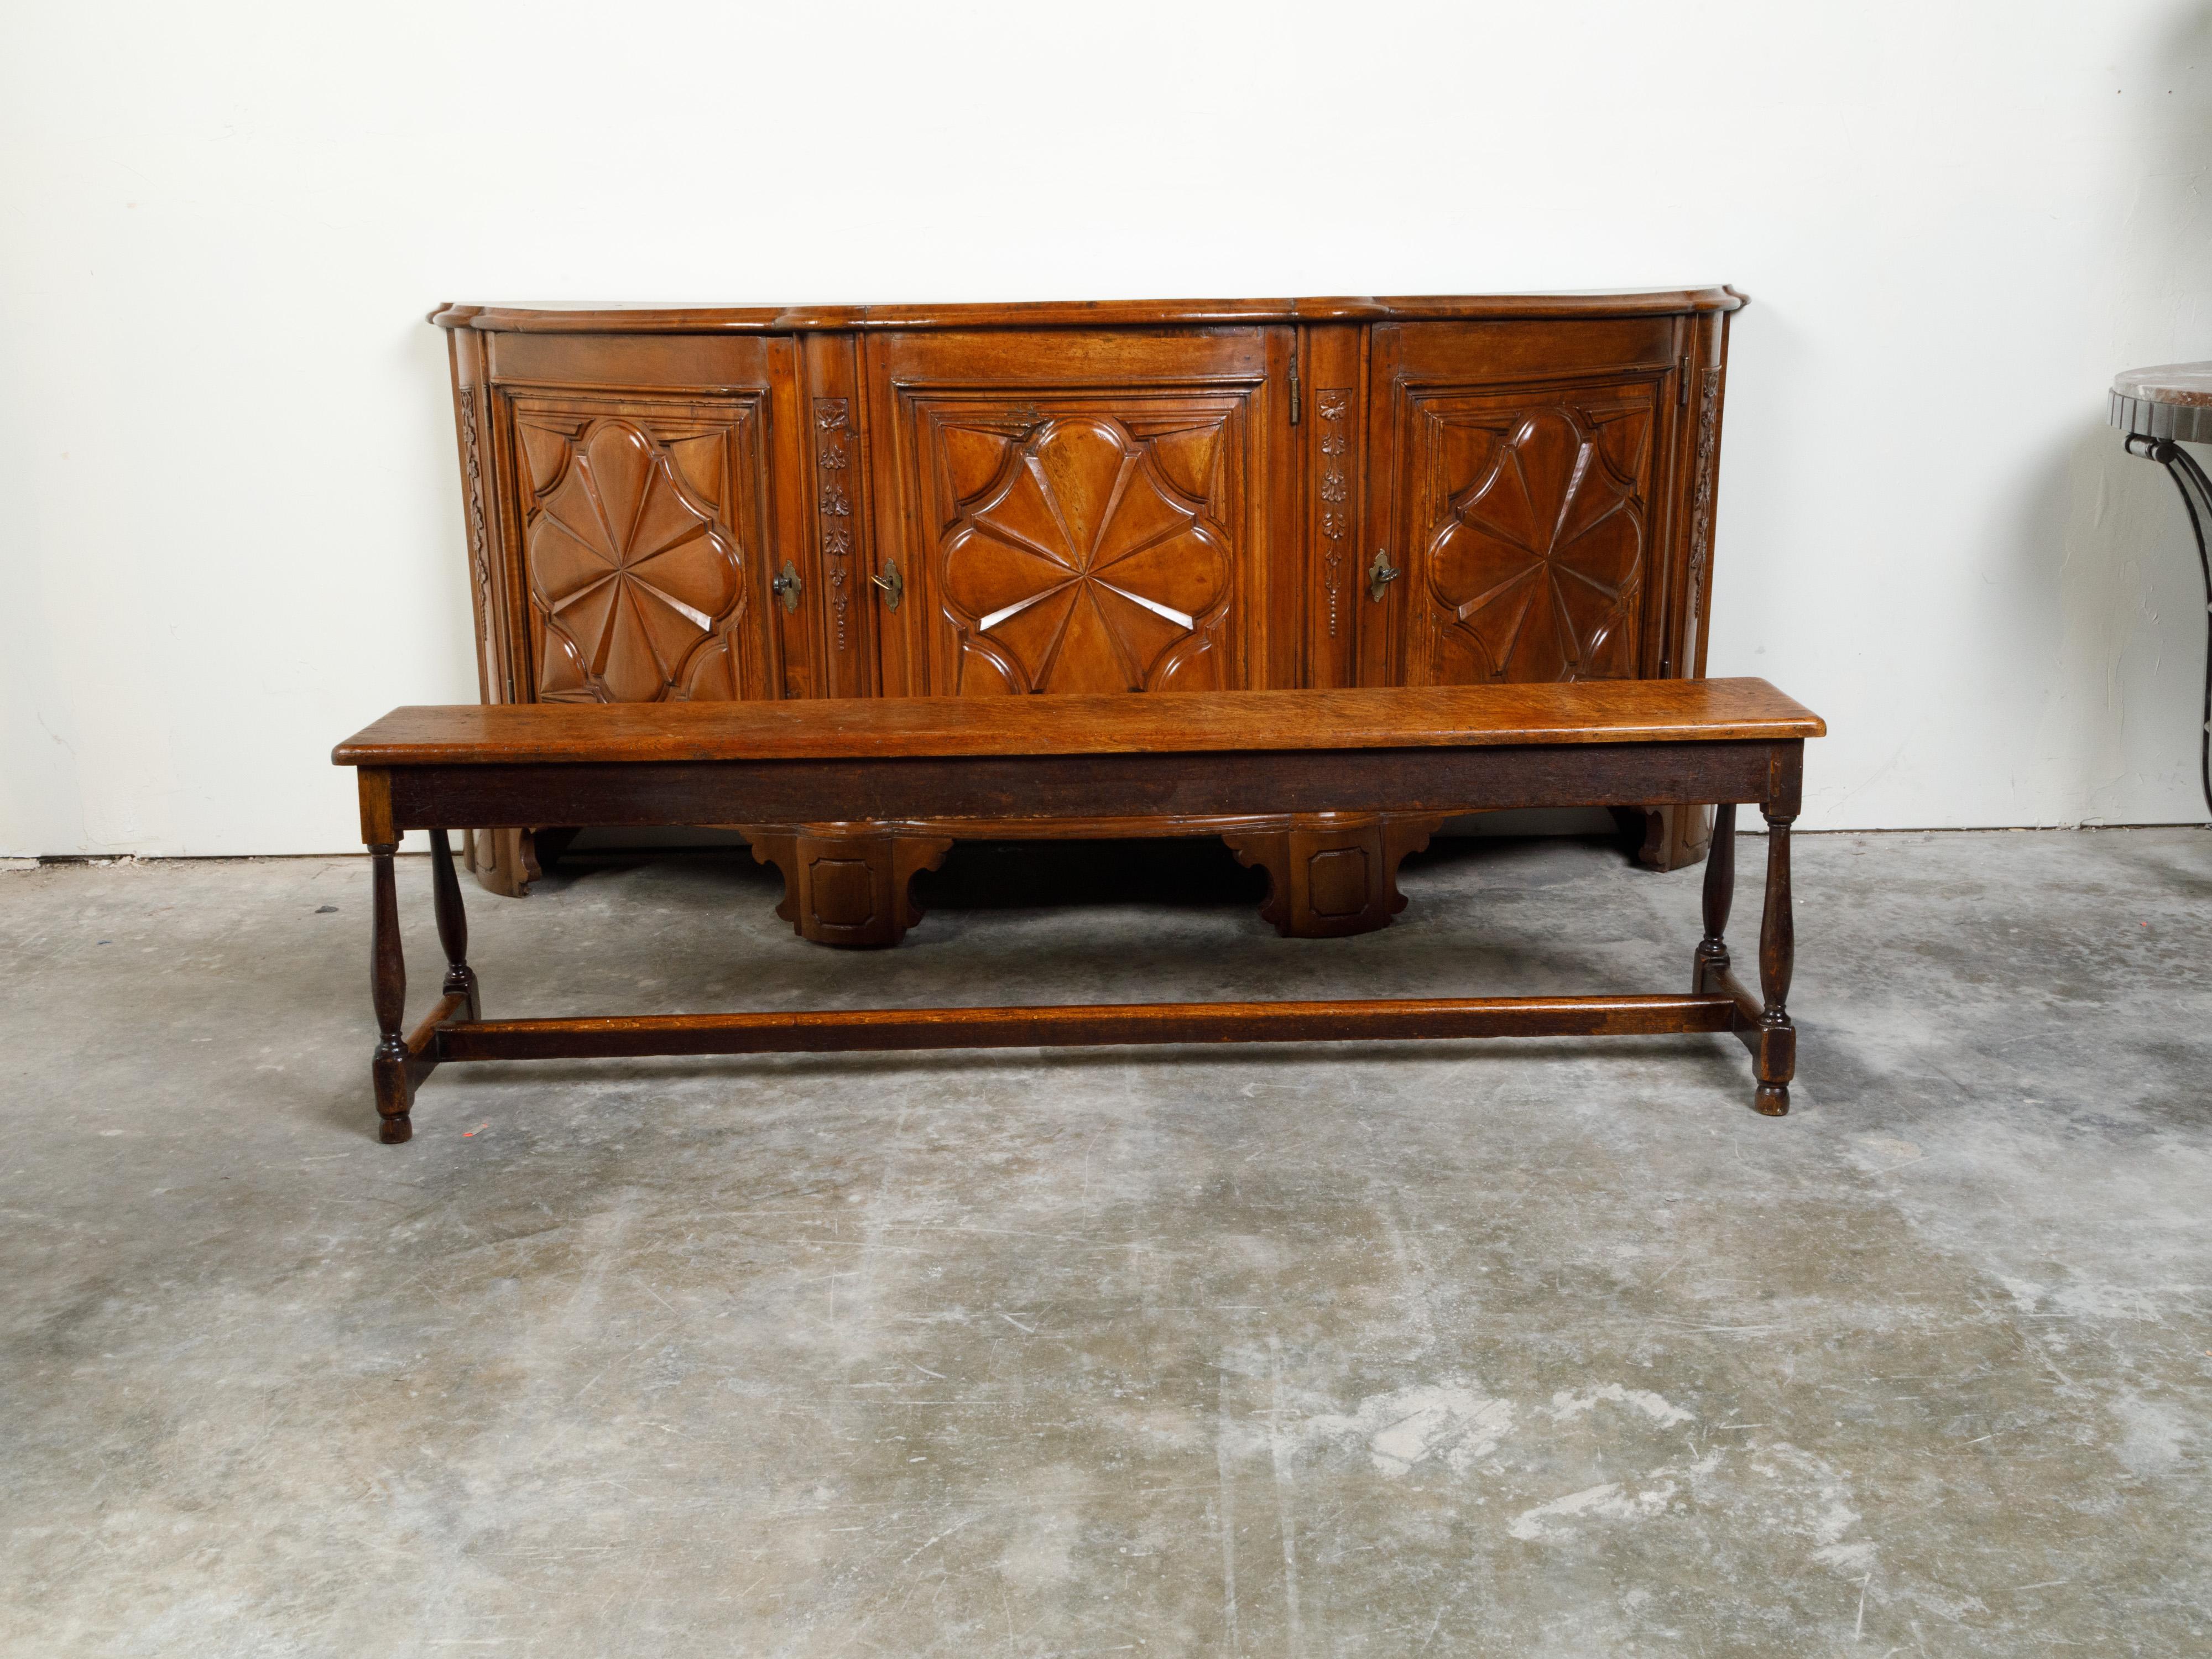 English 1900s Turn of the Century Oak Bench with Splaying Column-Shaped Legs 3